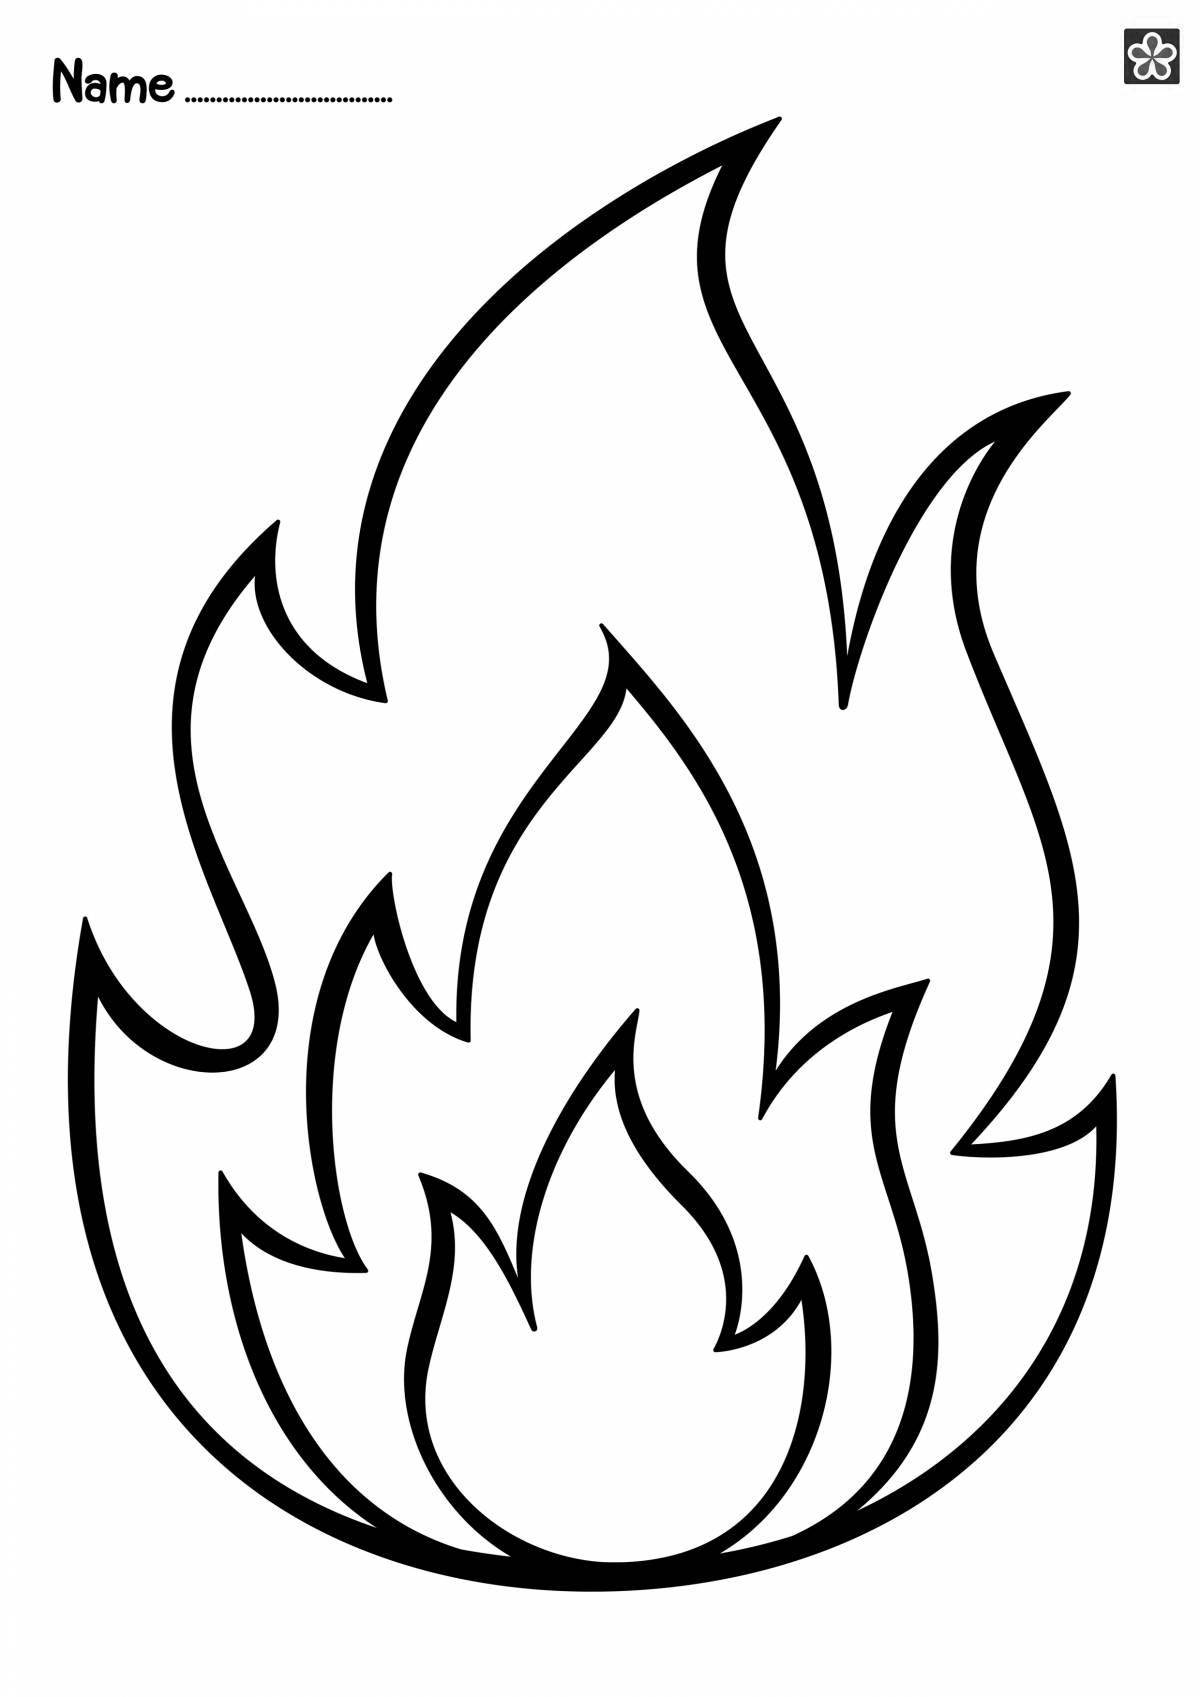 Shining Campfire Coloring Page for Toddlers